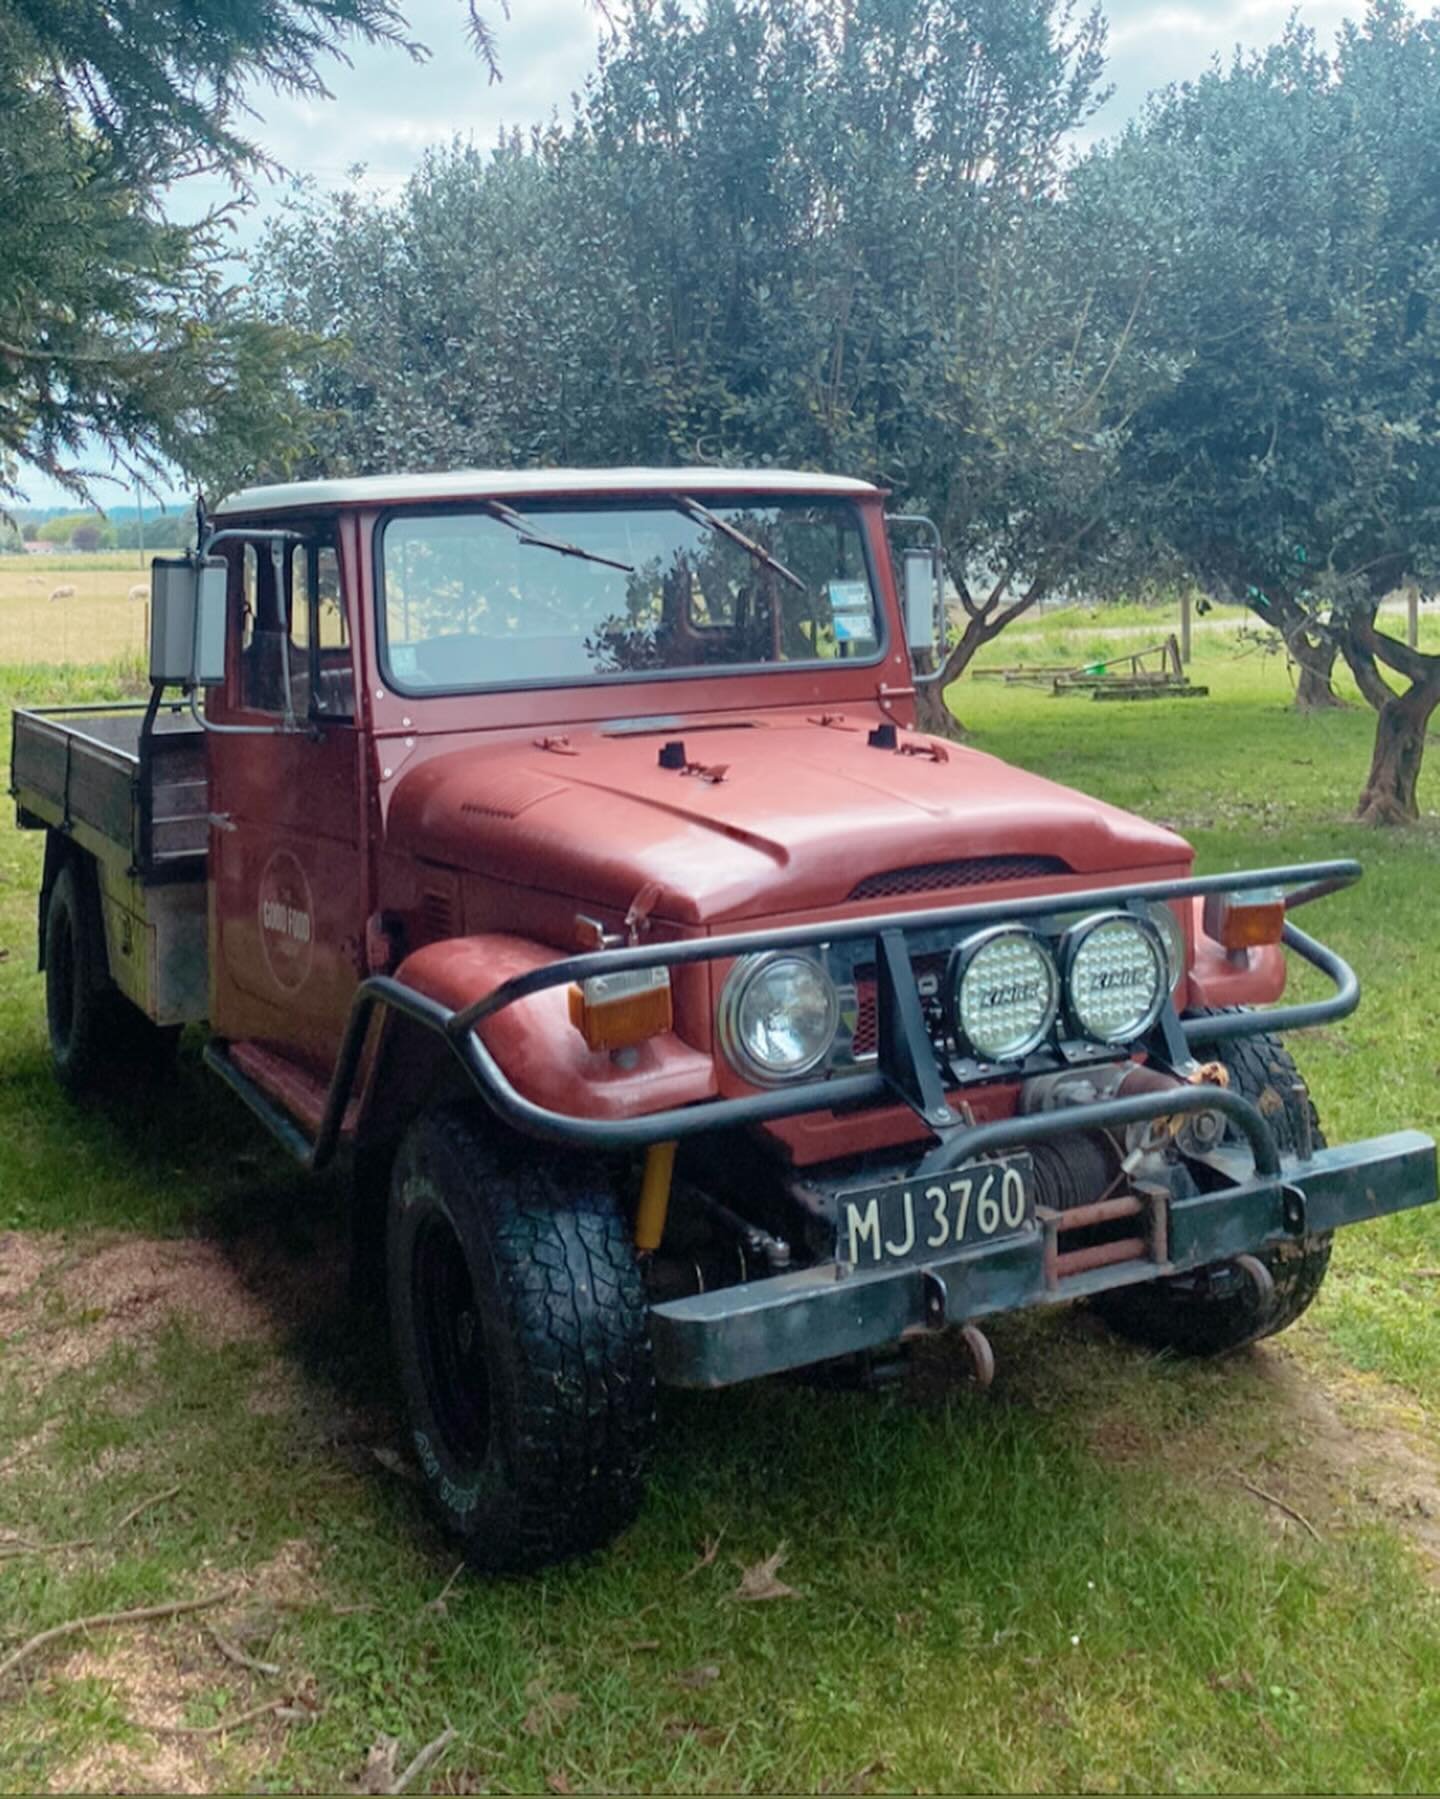 &ldquo;Where is the landcruiser?!&rdquo;
.
This is a question I&rsquo;ve been asked a bit this past season, and the answer is, off the road. Our 1975 Toyota landcruiser was showing its age and was having chassis issues, and normal old Toyota rust iss